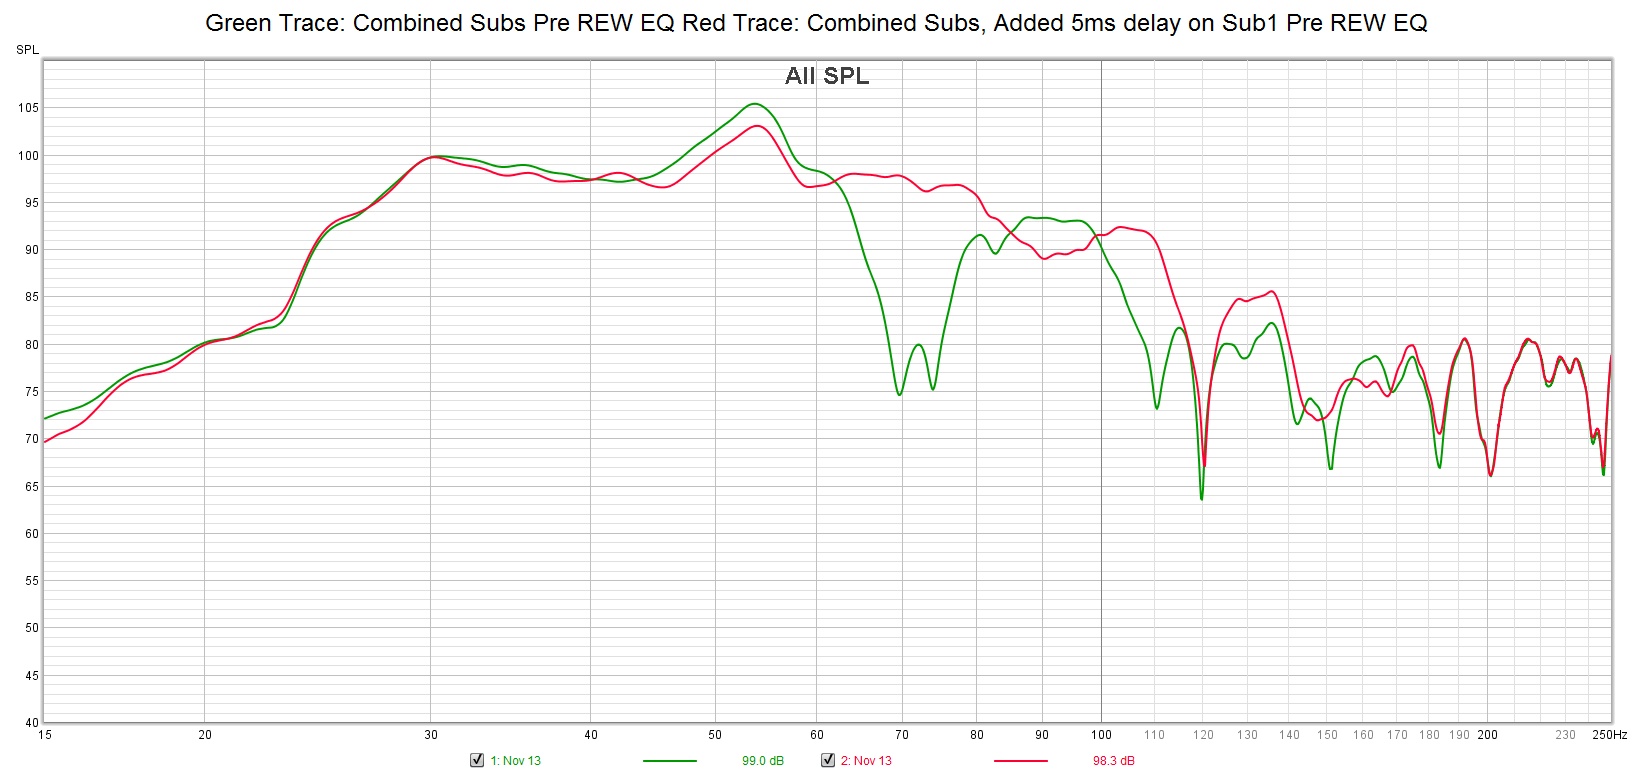 Combined Subs and Combined Subs with 5ms delay on Sub 1 Pre REW EQ.jpg